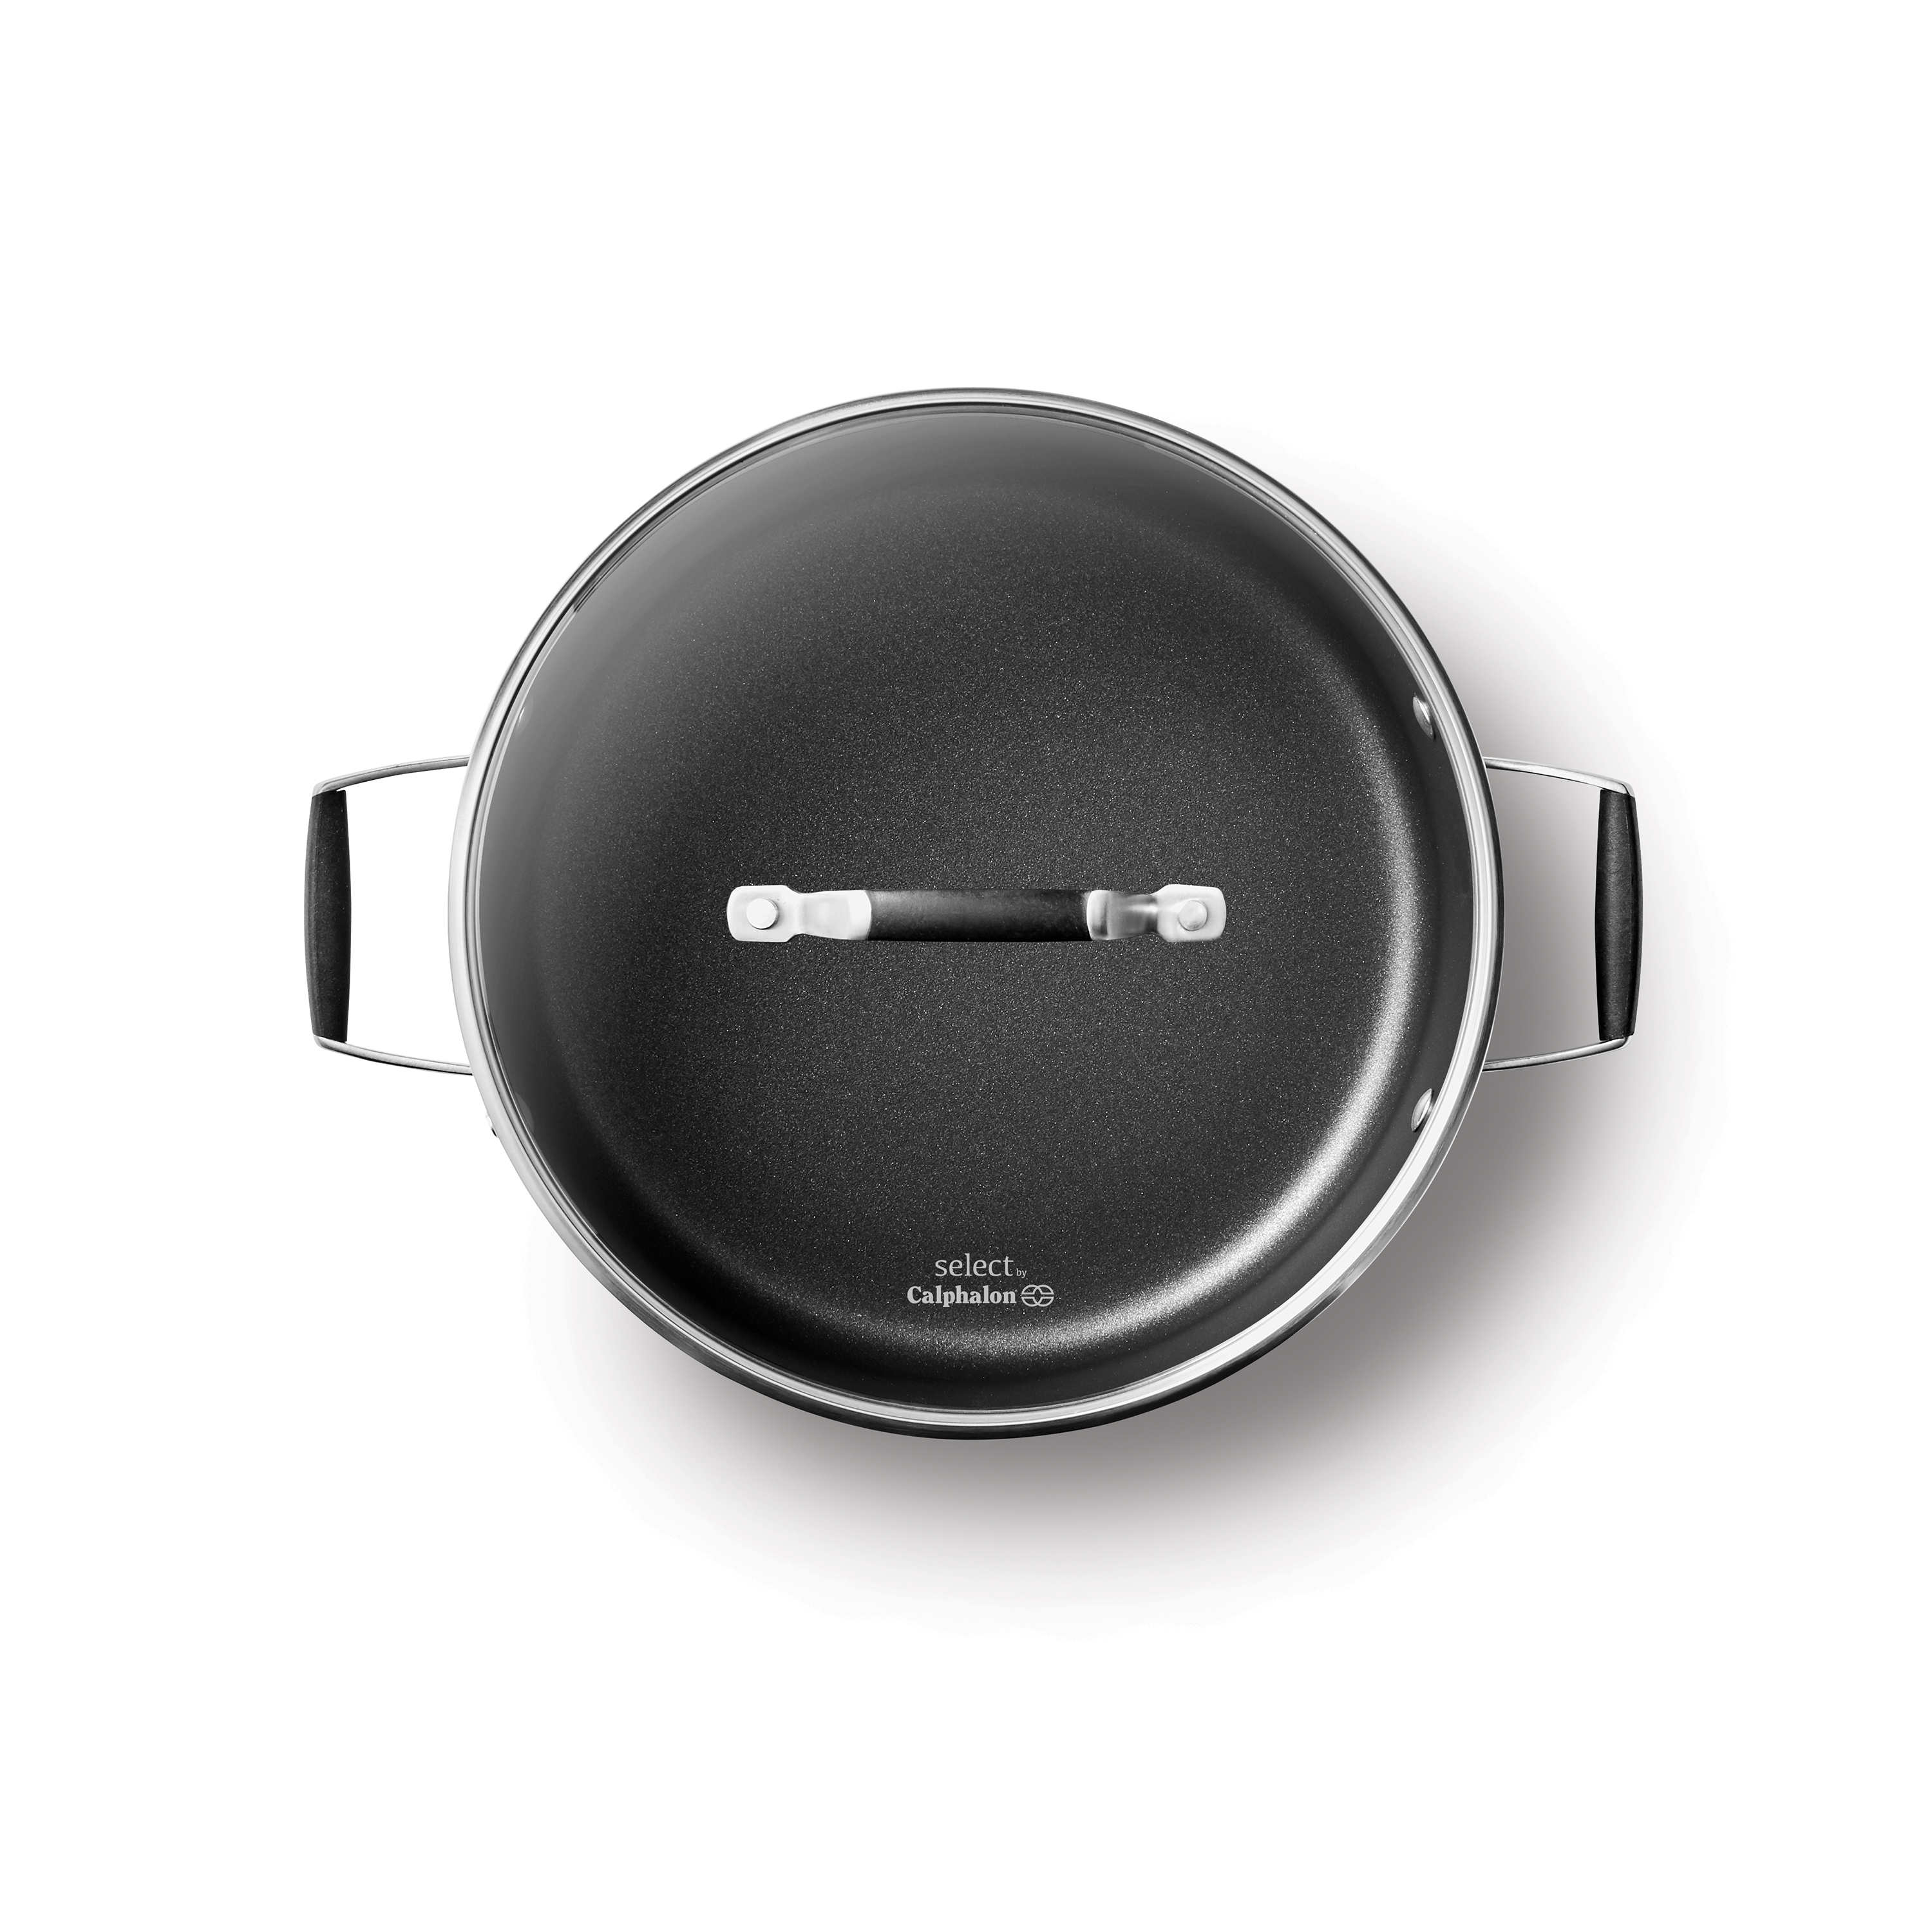 Calphalon Hard-Anodized Nonstick 5-Quart Dutch Oven with Cover - image 4 of 9